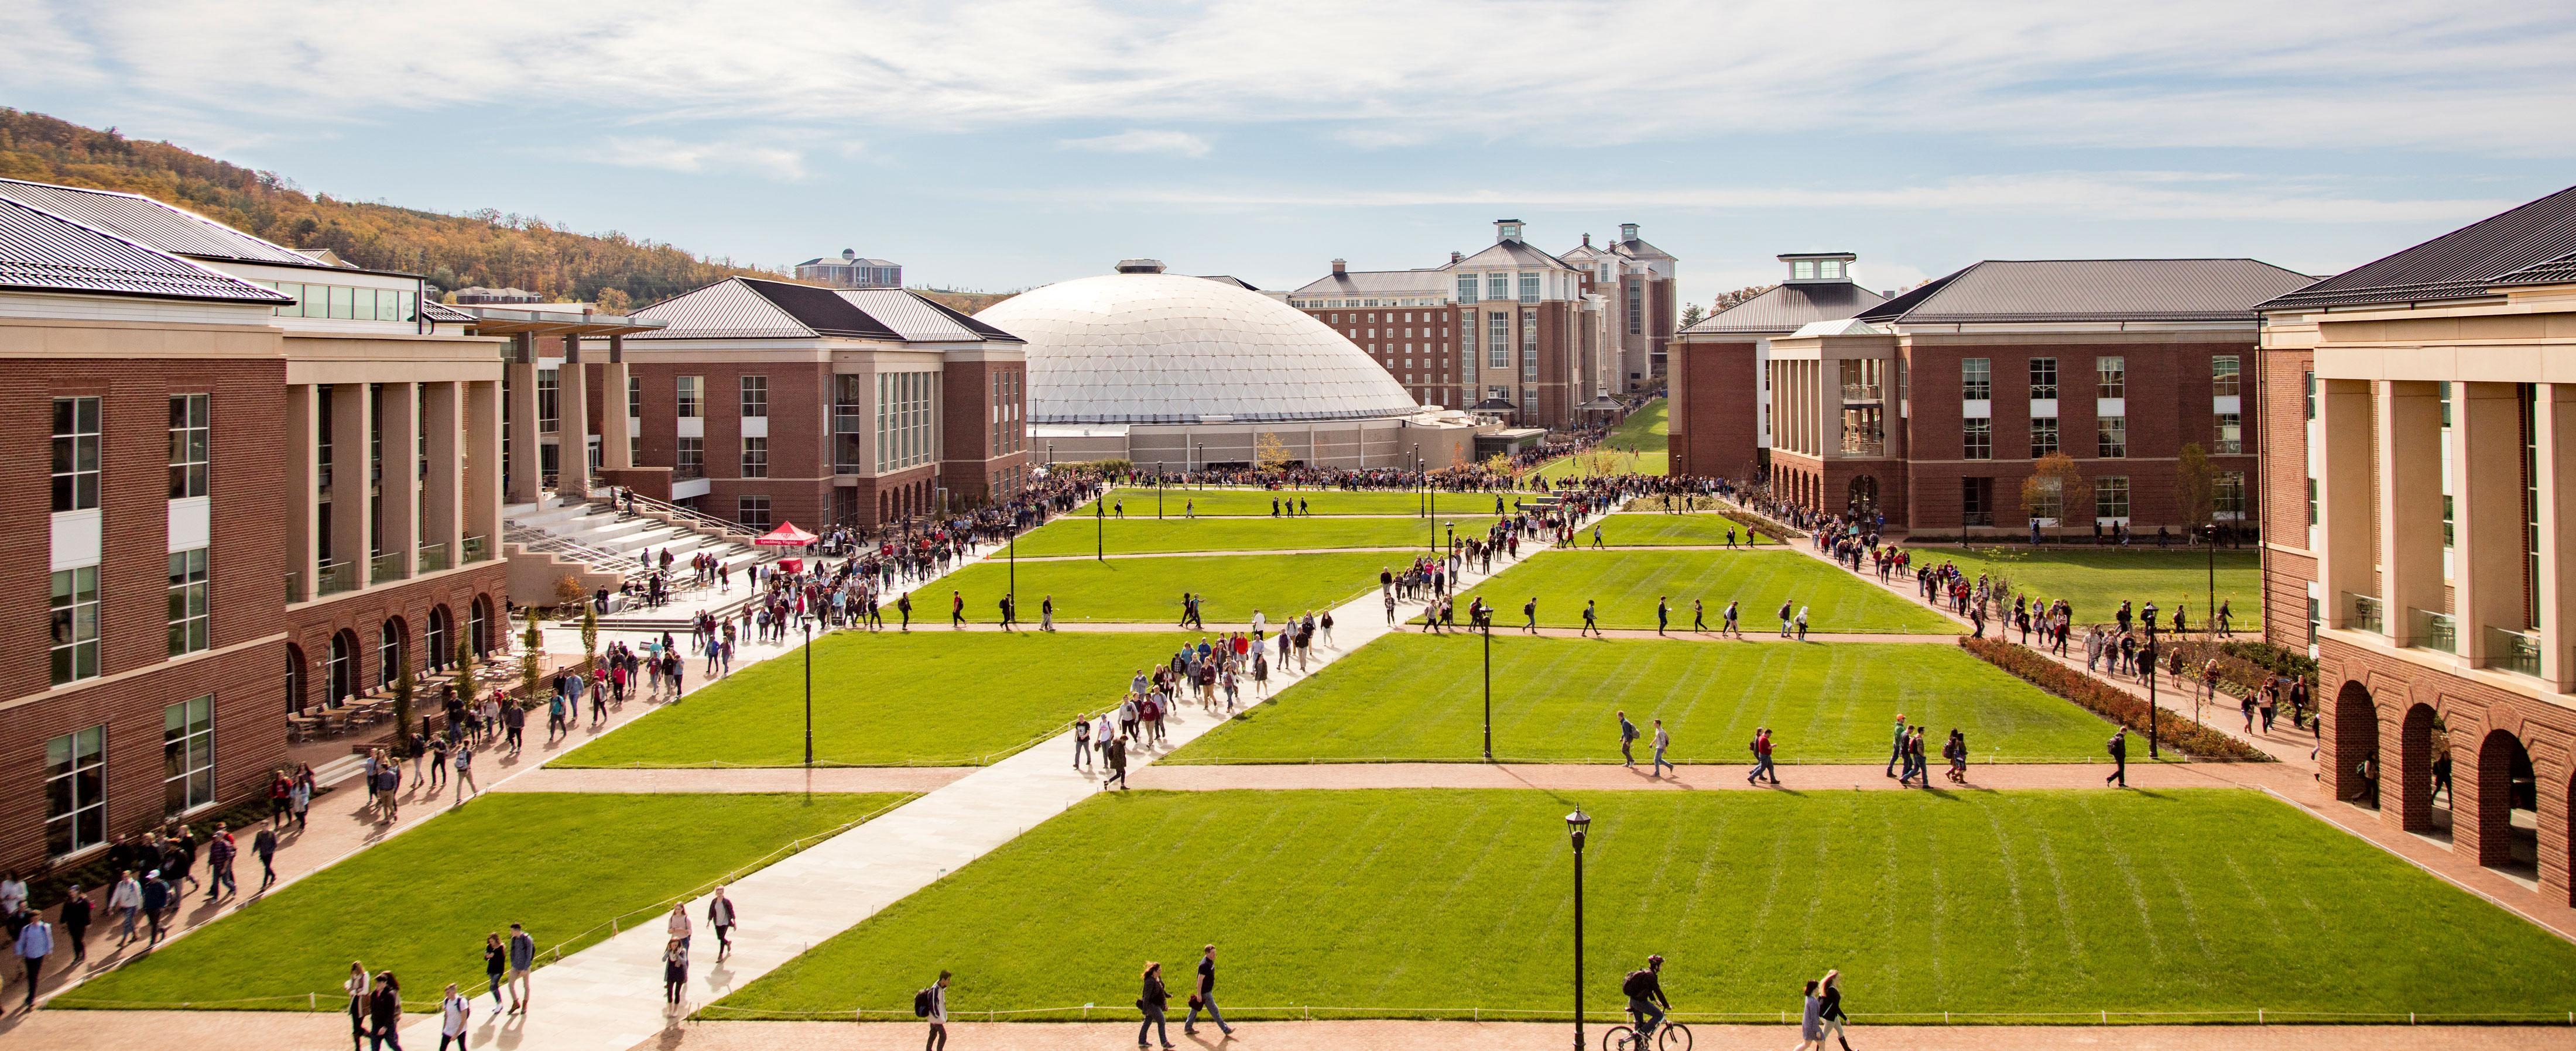 Innovation in Education — How Liberty University Uses Learning Science